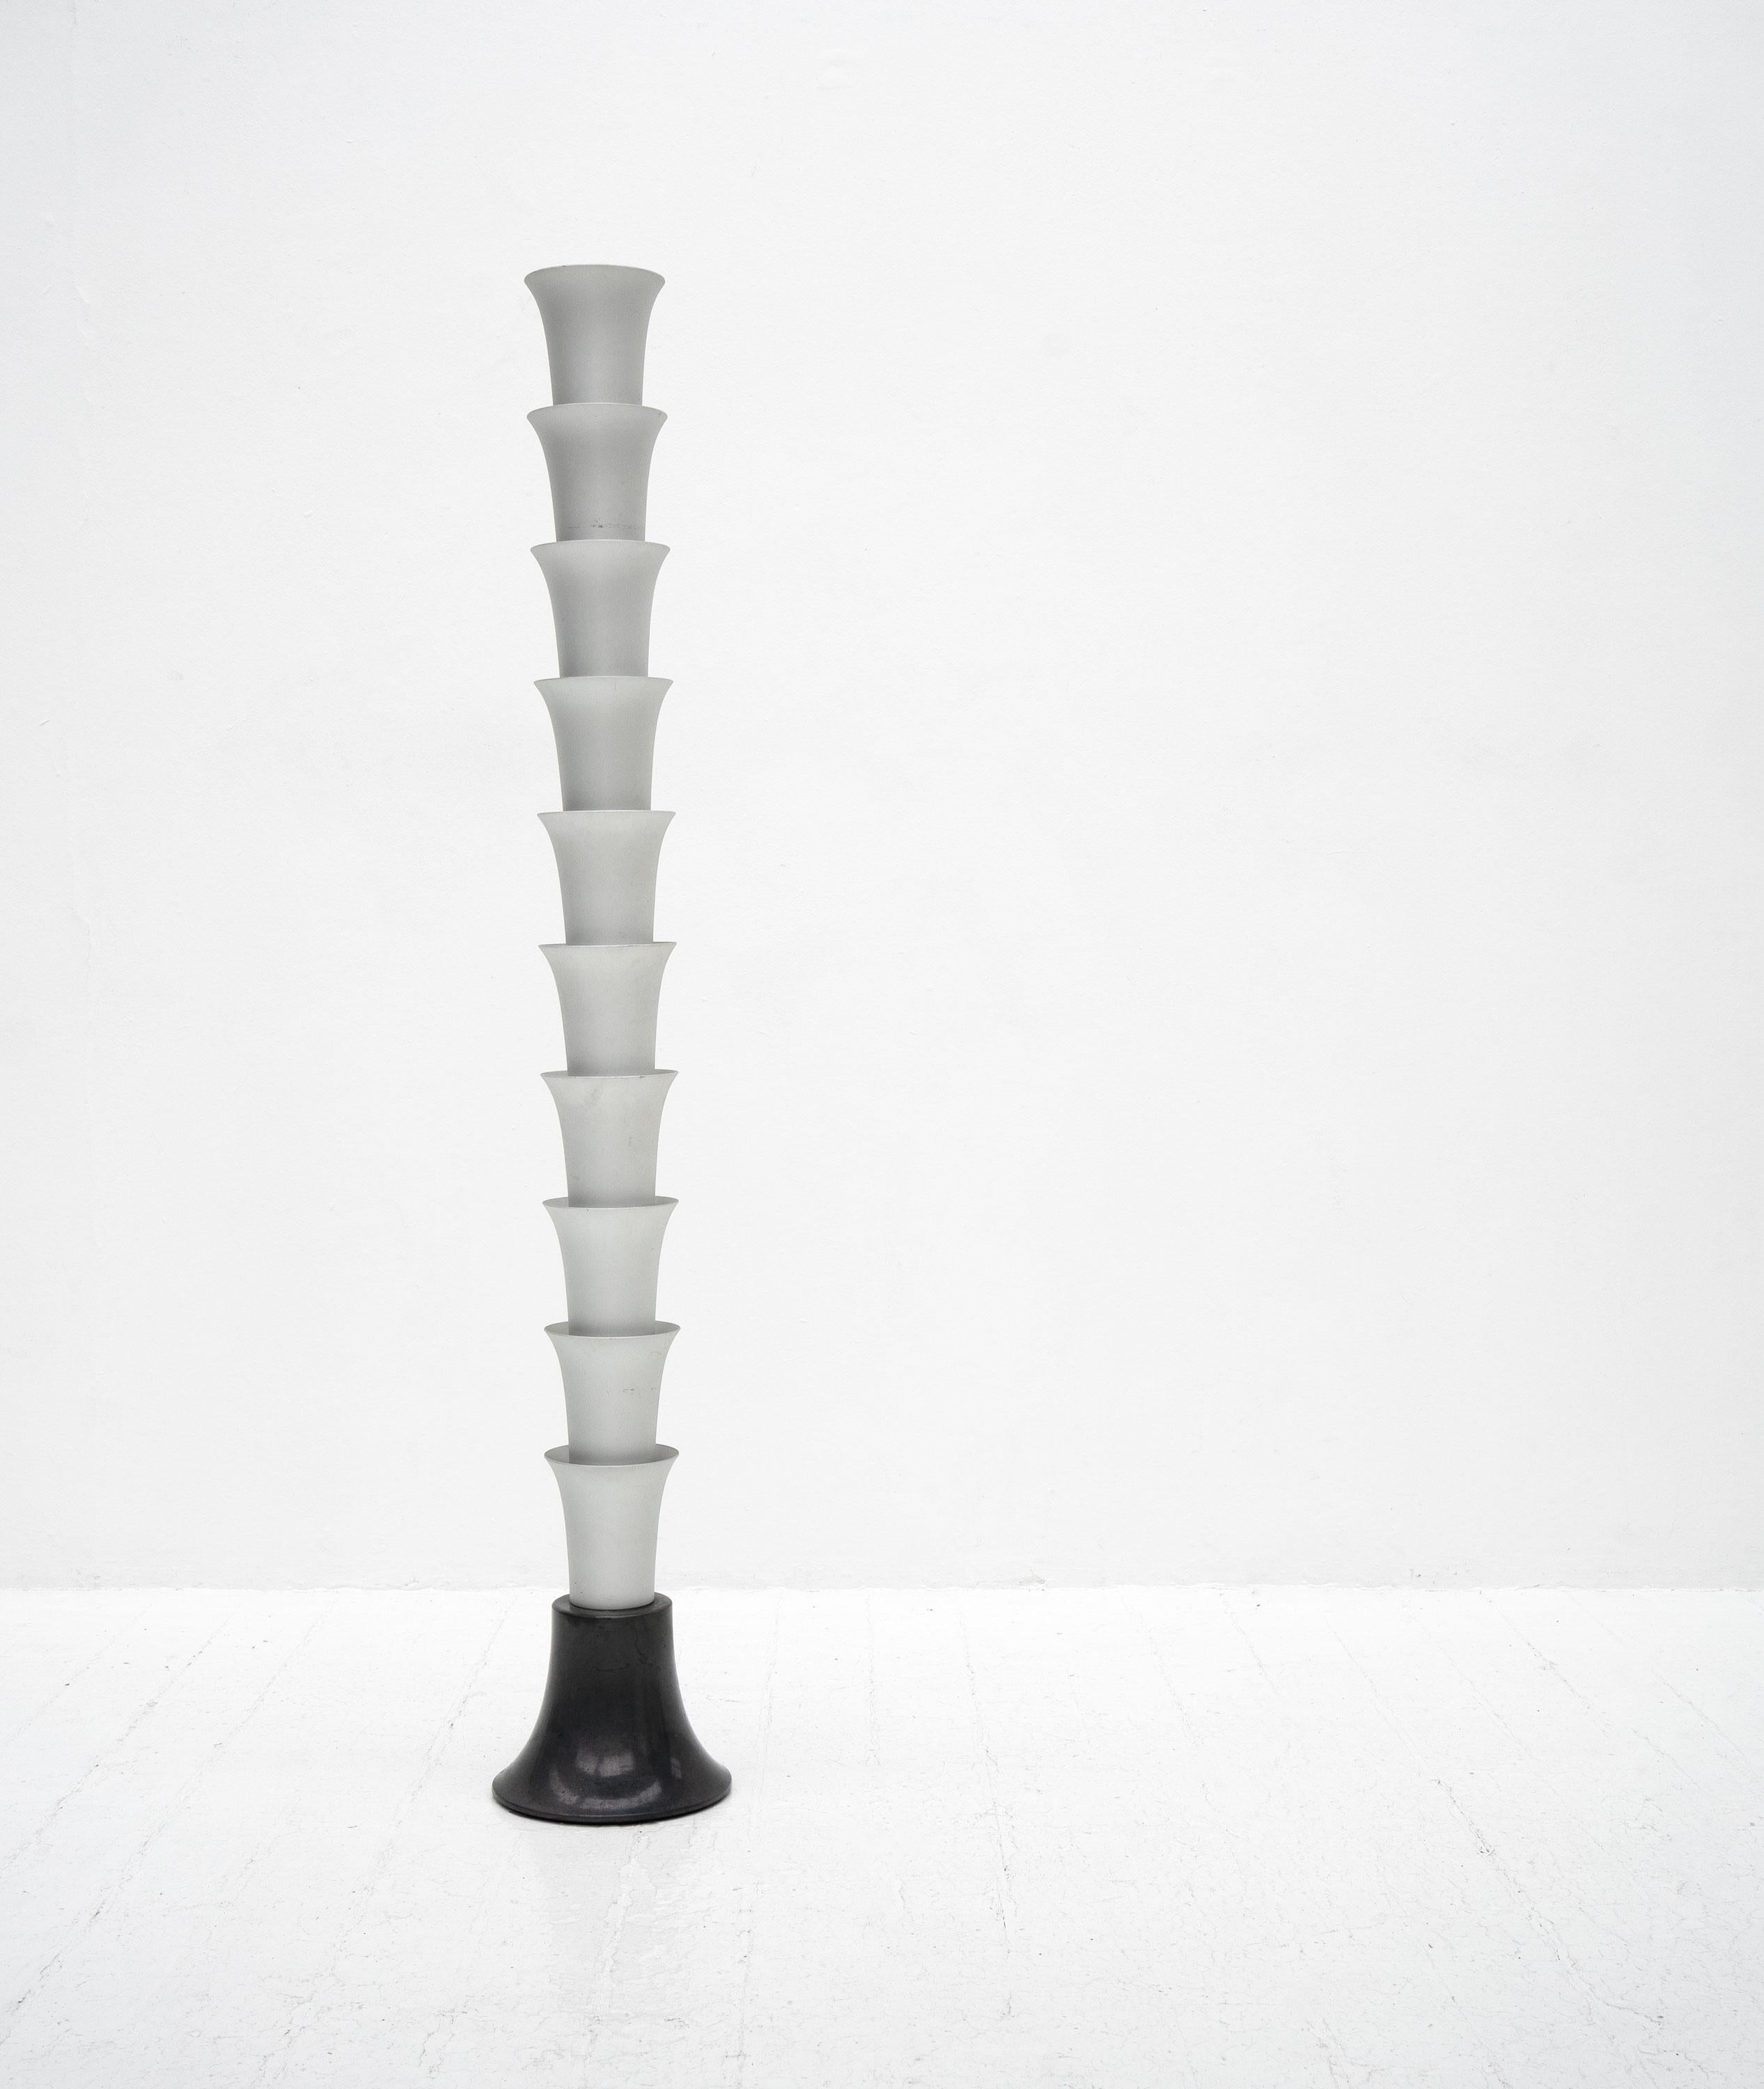 A postmodern 'Palm Spring' floor lamp designed by Matteo Thun and Maurizo Favetta, and manufactured by Tronconi, Italy 1989.

The lamp is composed from 10 conical aluminium segments stacked on top of an ABS base, taking the form of the trunk of a